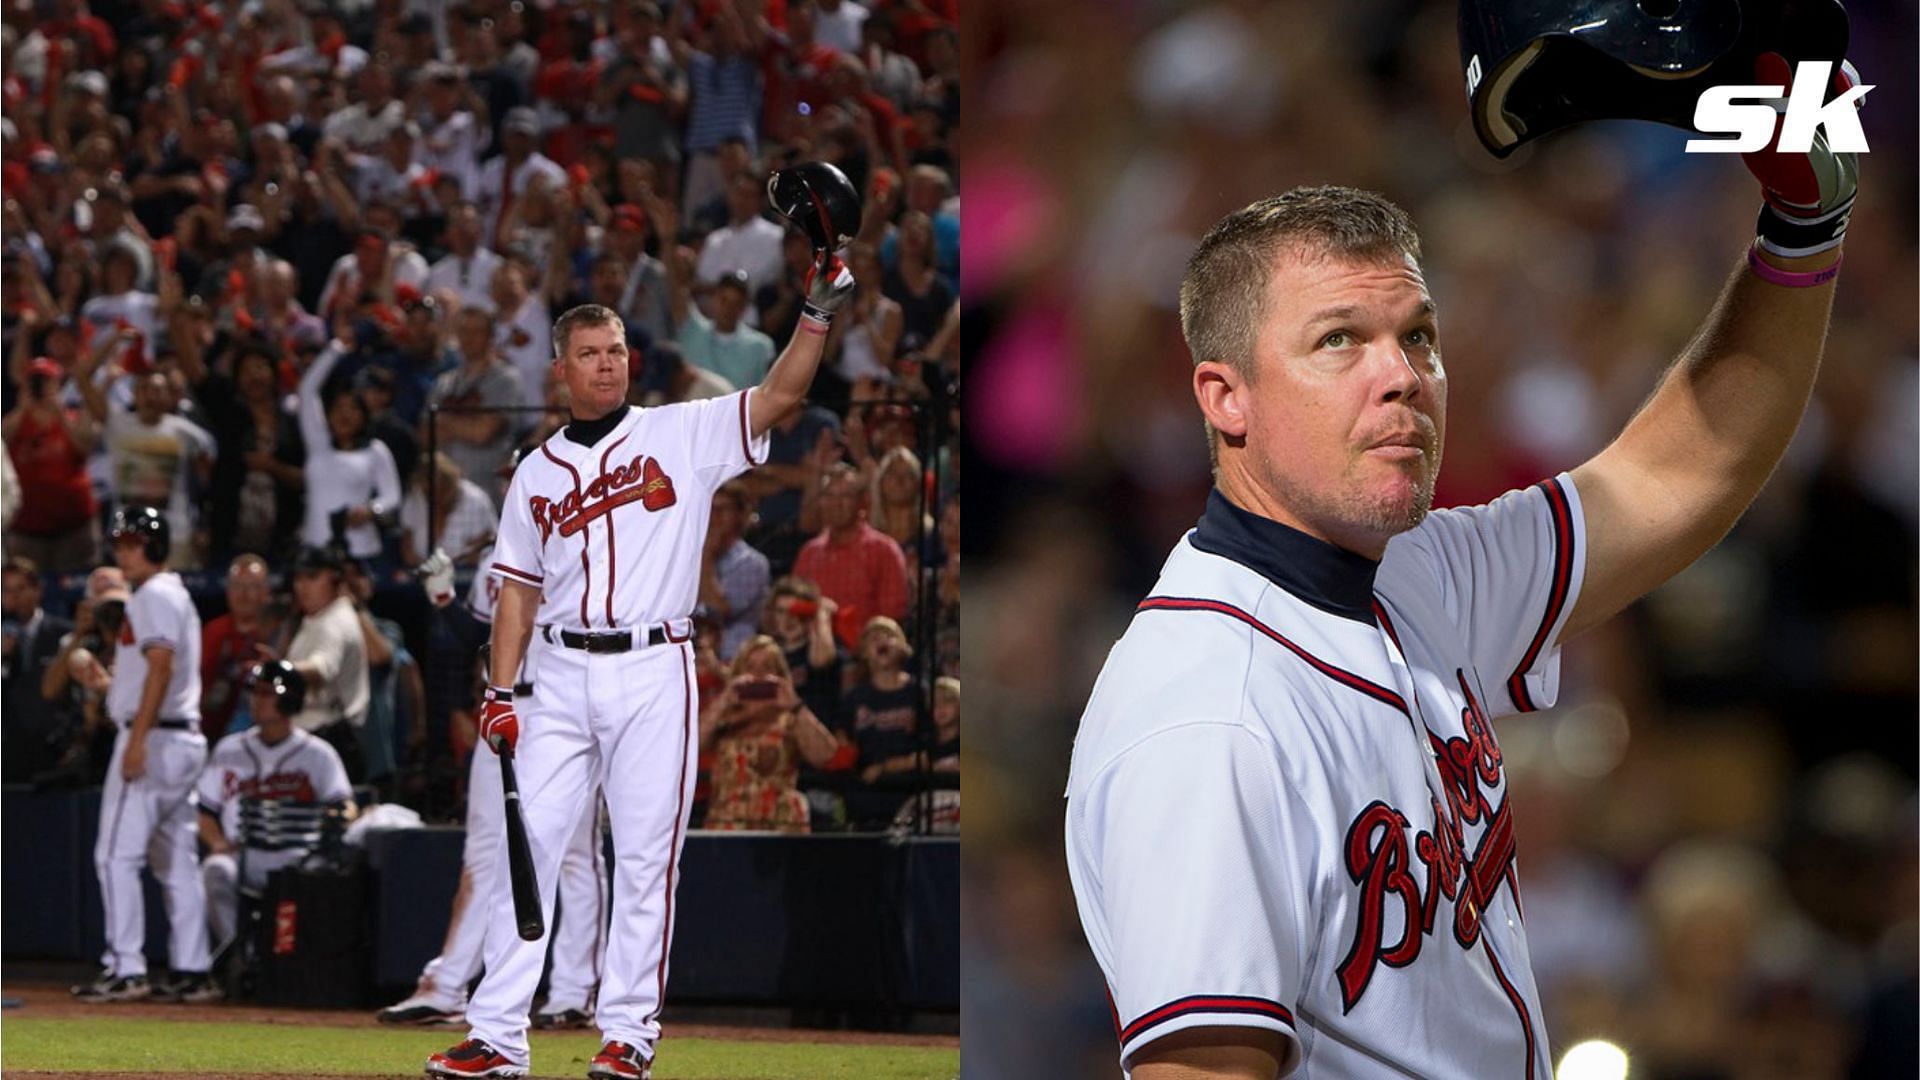 In 2017, Chipper Jones stressed the importance of letting his children enjoy baseball without pressure